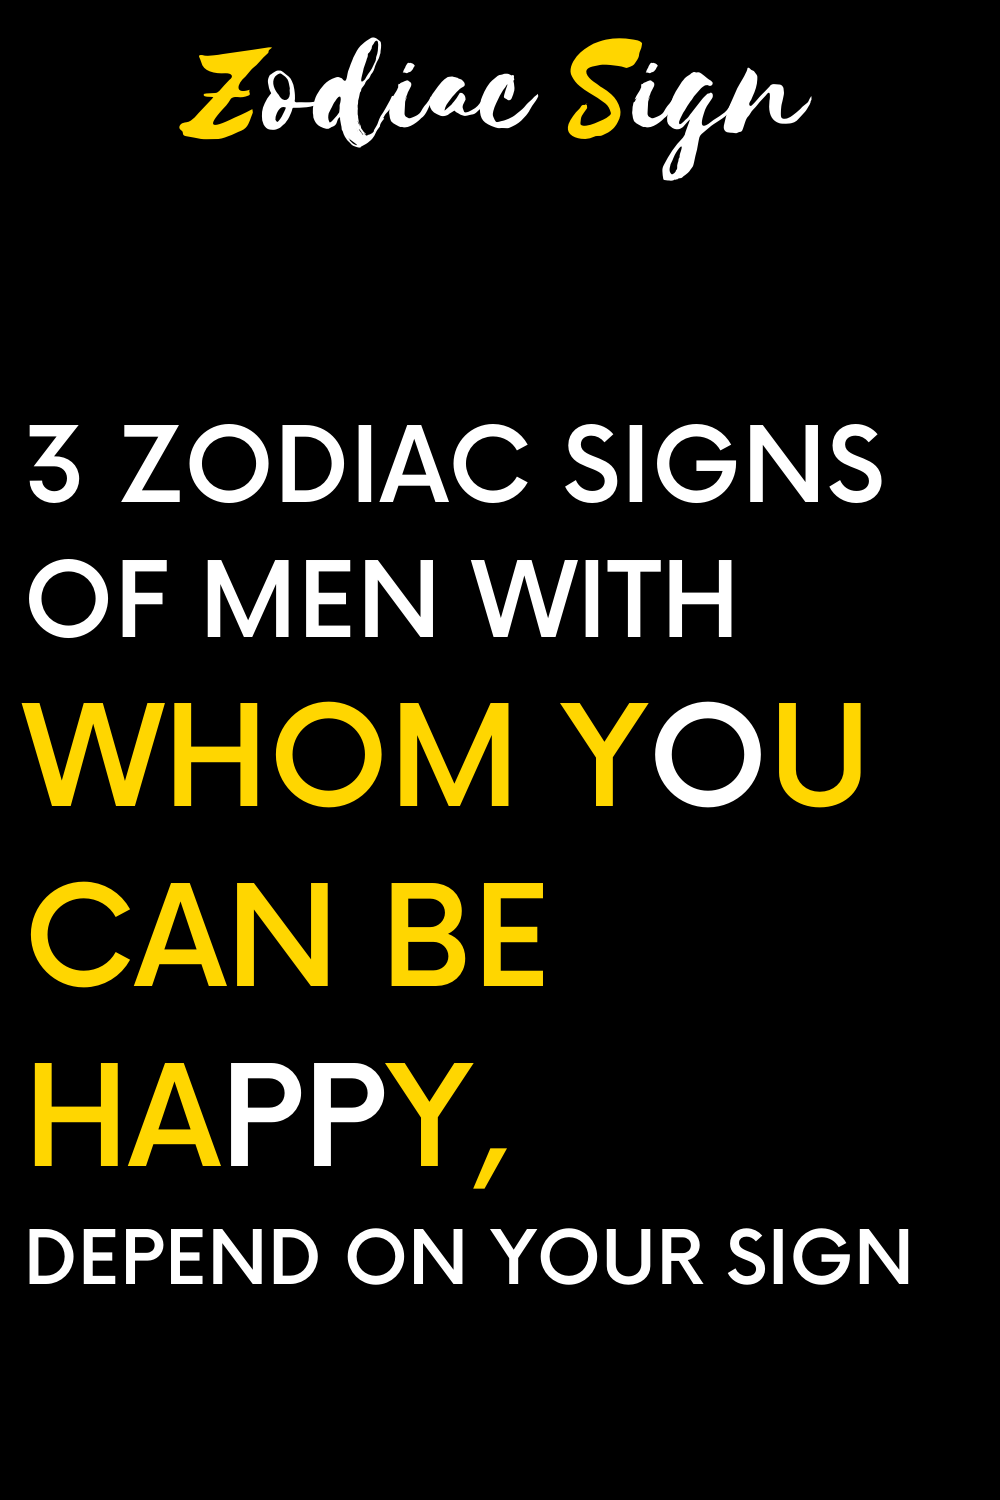 3 zodiac signs of men with whom you can be happy, depend on your sign